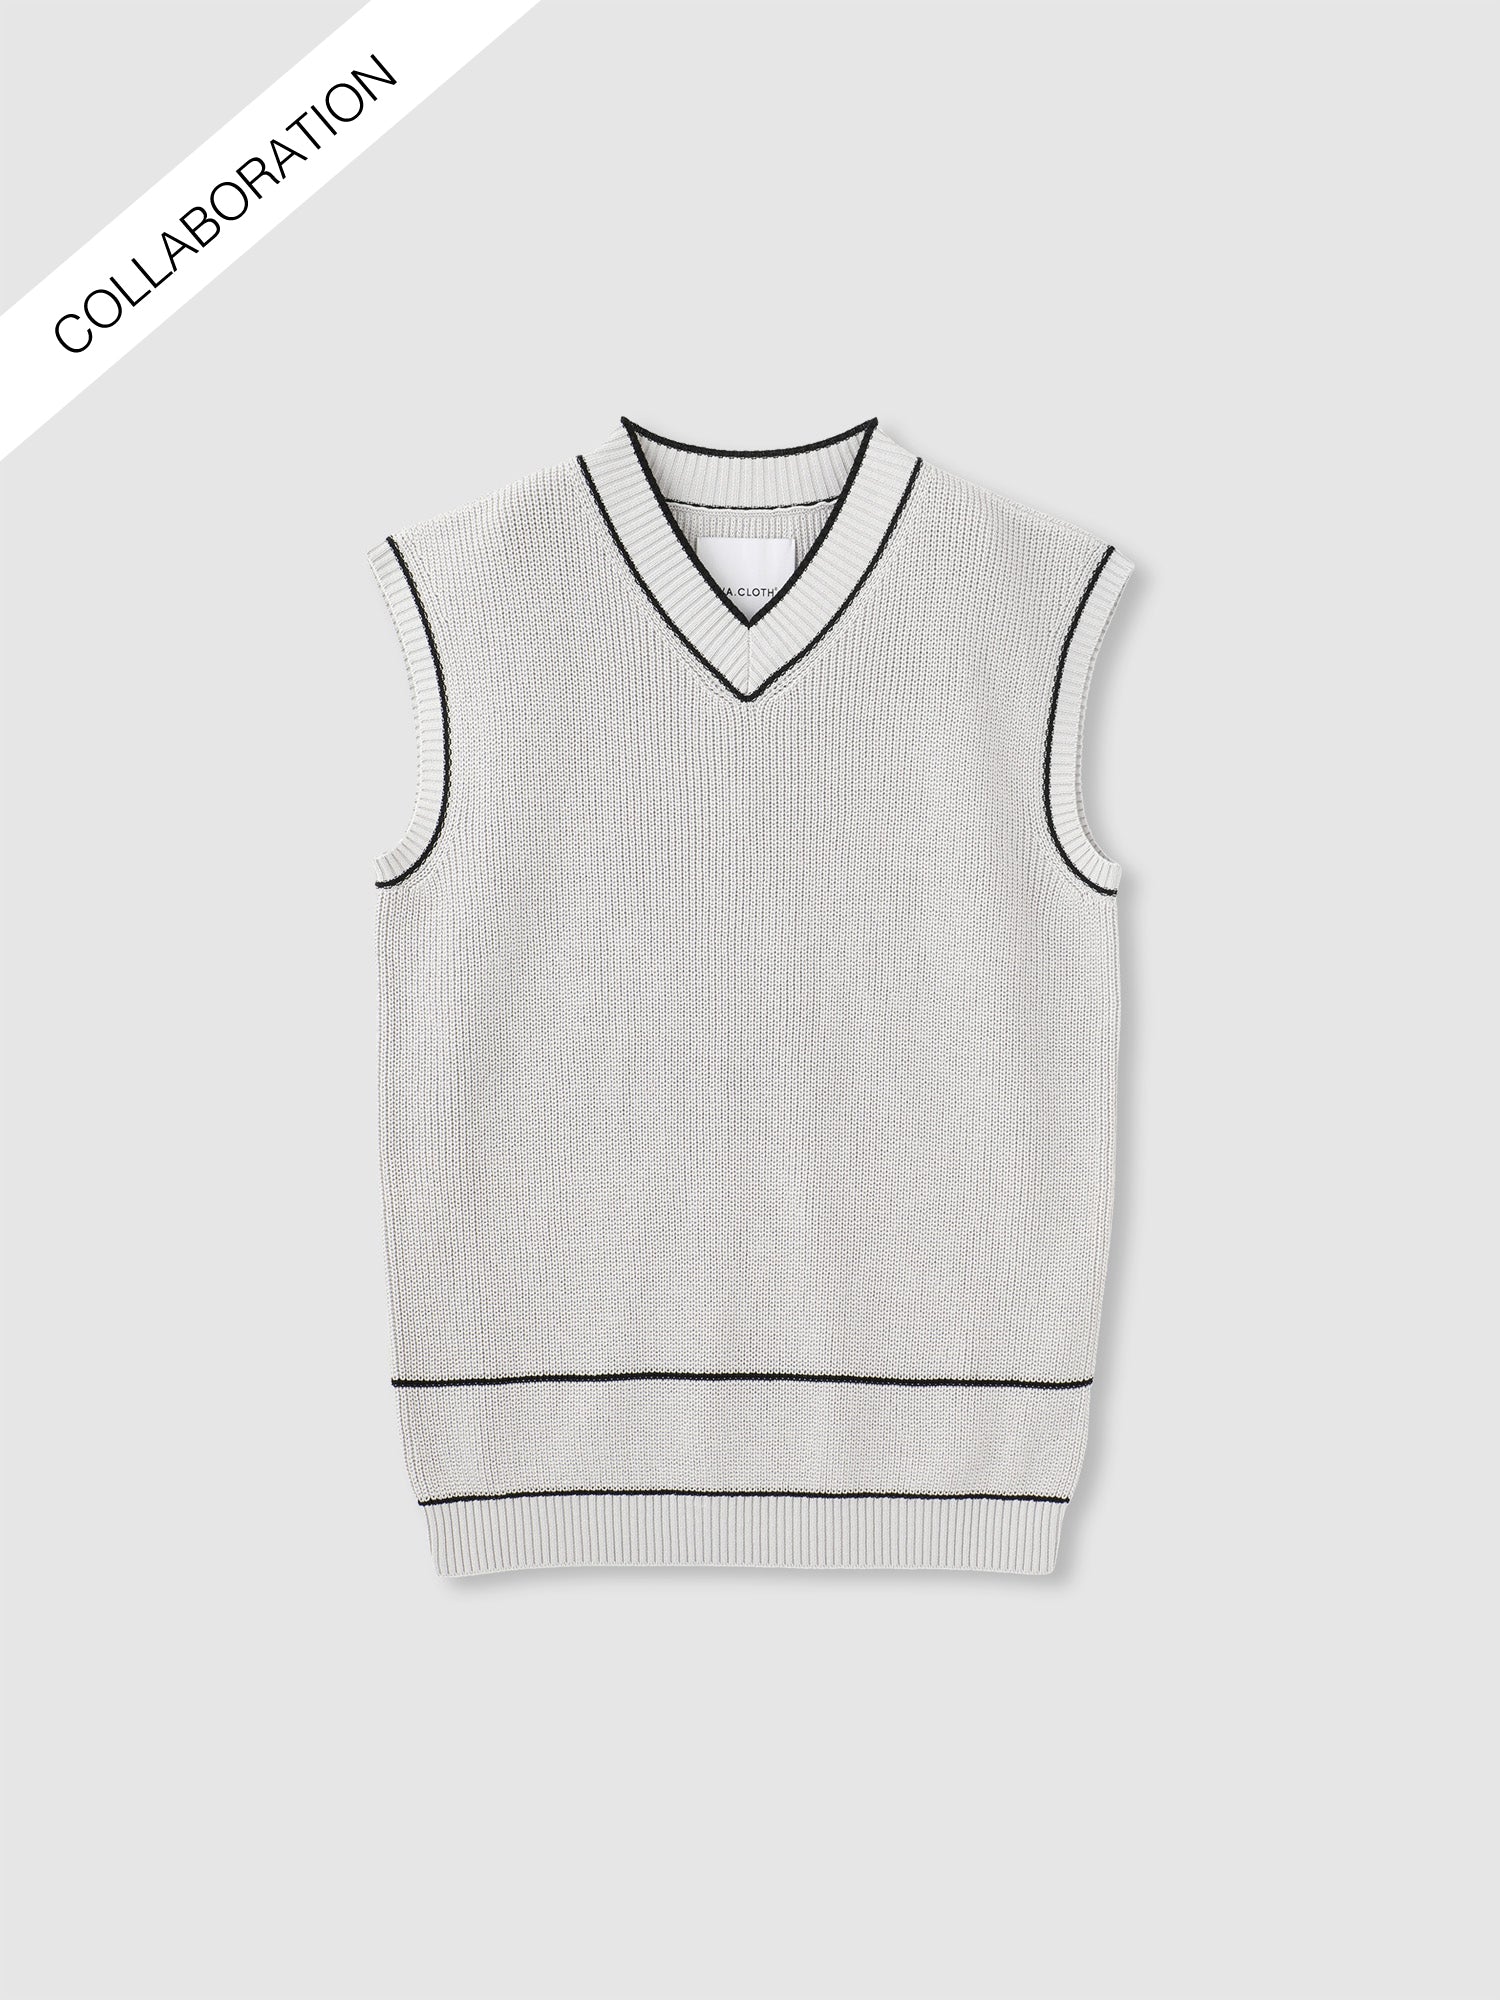 CT COLLAB STRIPED VEST <br> レイヤーコーディネートの新定番